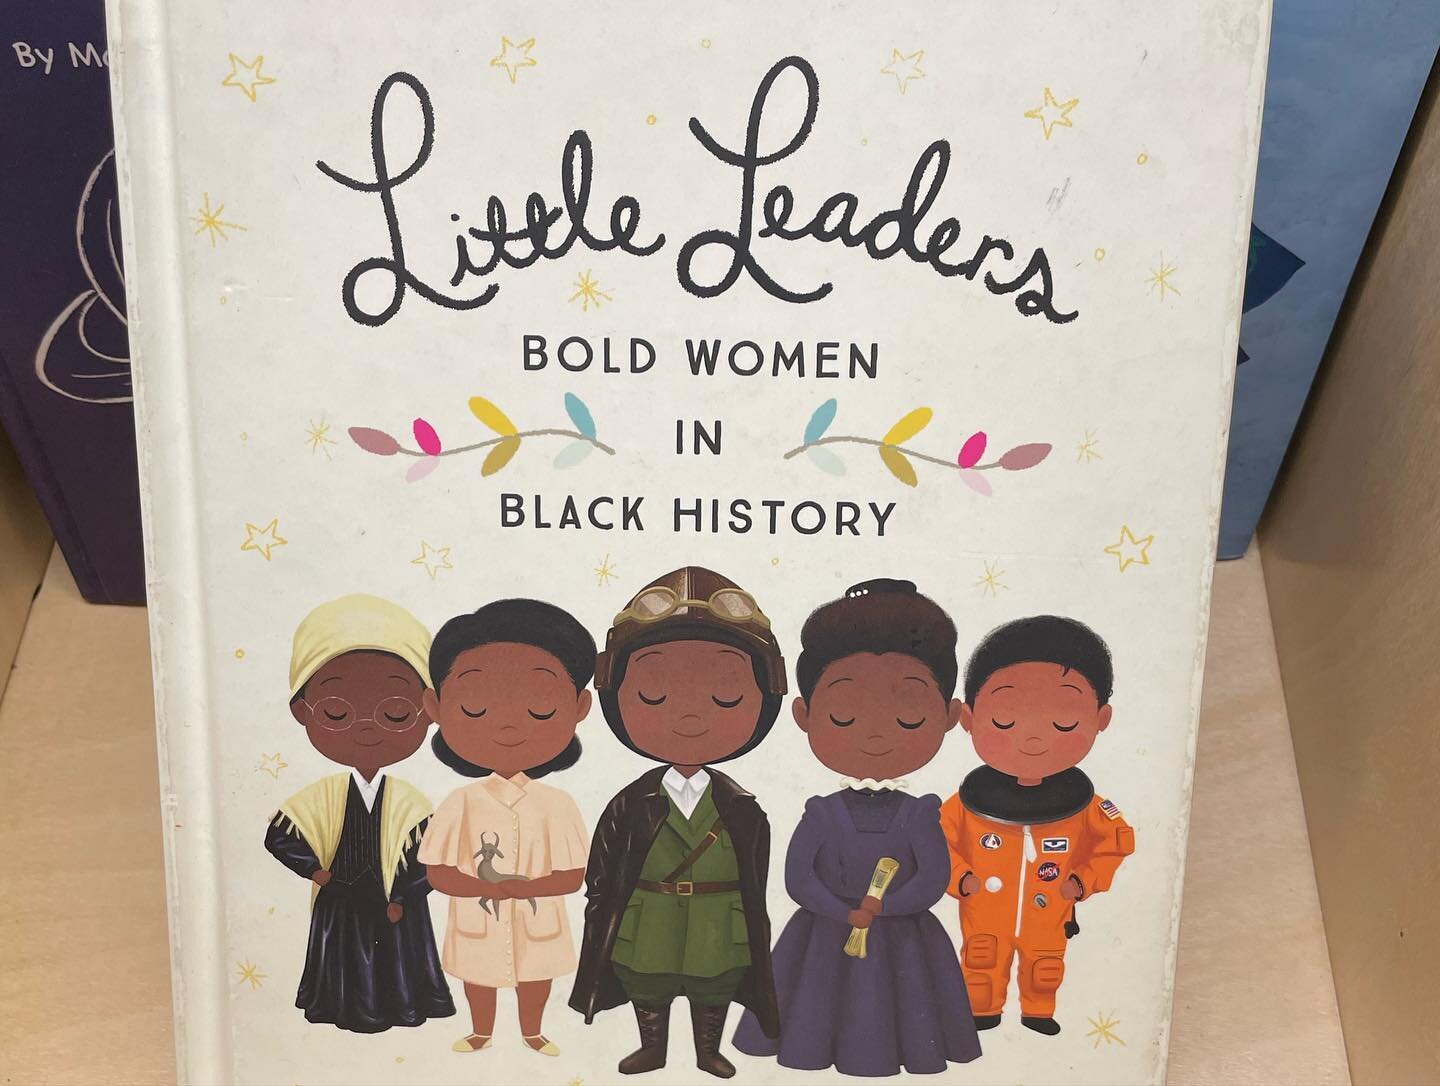 Take a look at what our students are reading! Comment with other recommendations that you and your kiddos have enjoyed. 😁#PlayfulUnity #PlayfulEducation #BlackHistoryInPlay  #BlackHistoryMonth #BlackHistoryInspiration #NurserySchoolofWestchester #we